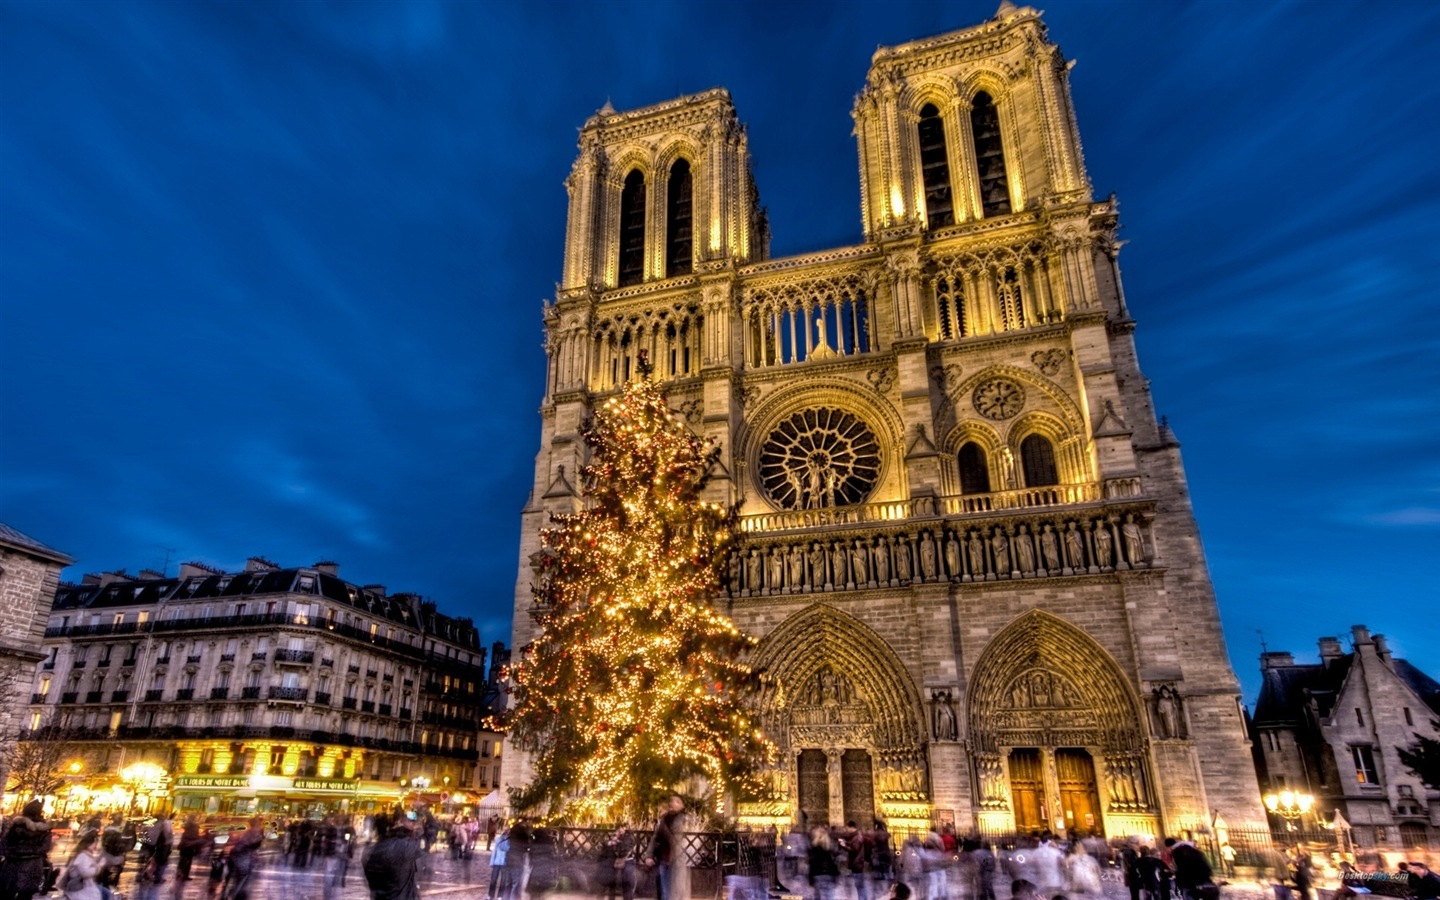 Notre Dame HD Wallpapers #7 - 1440x900